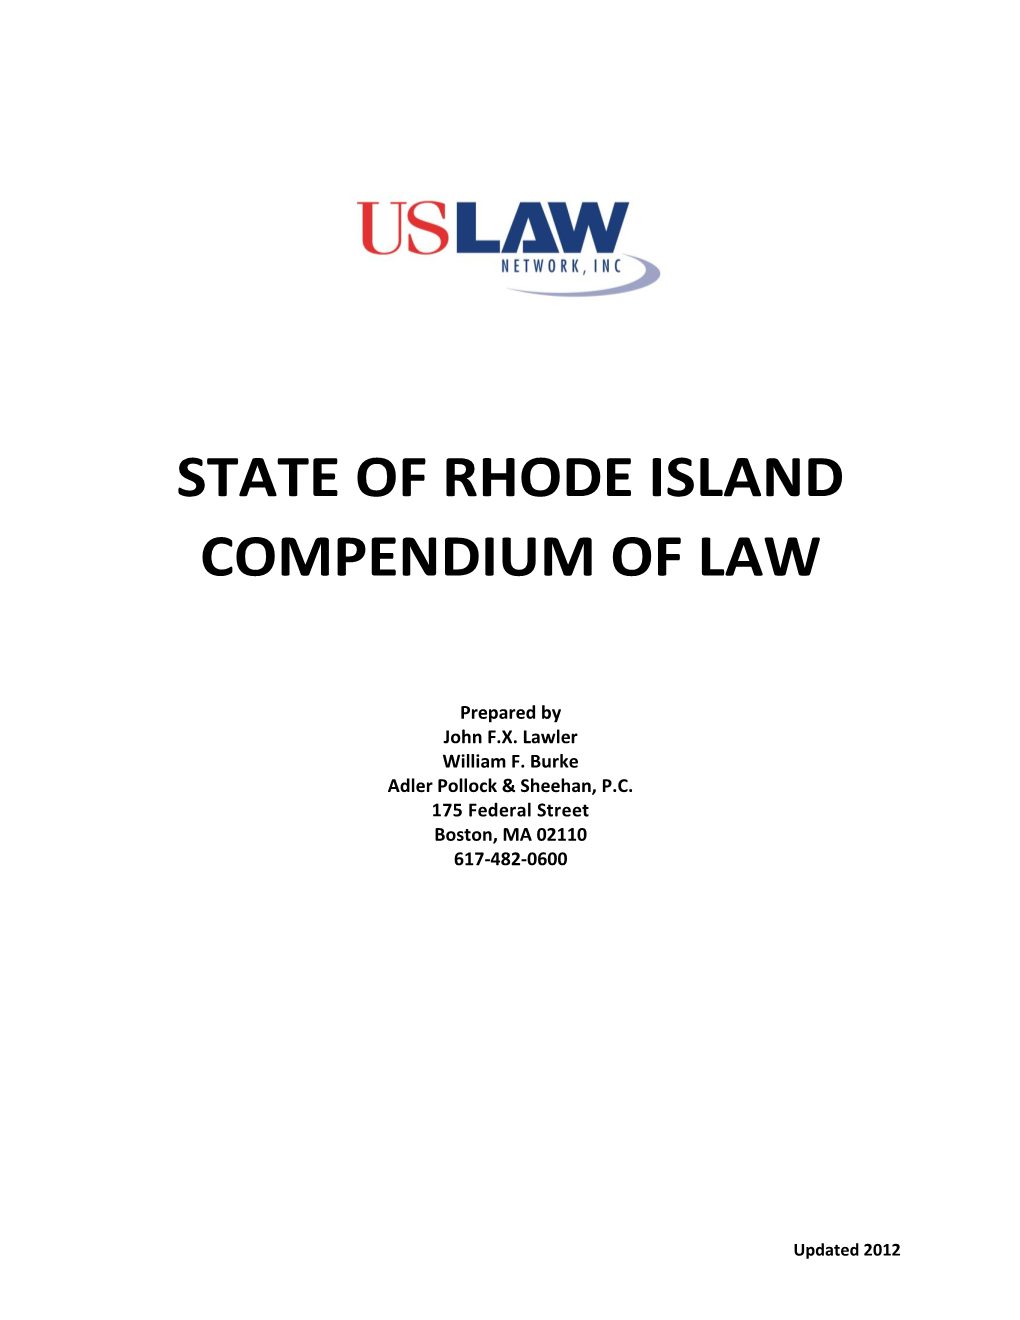 State of Rhode Island Compendium of Law